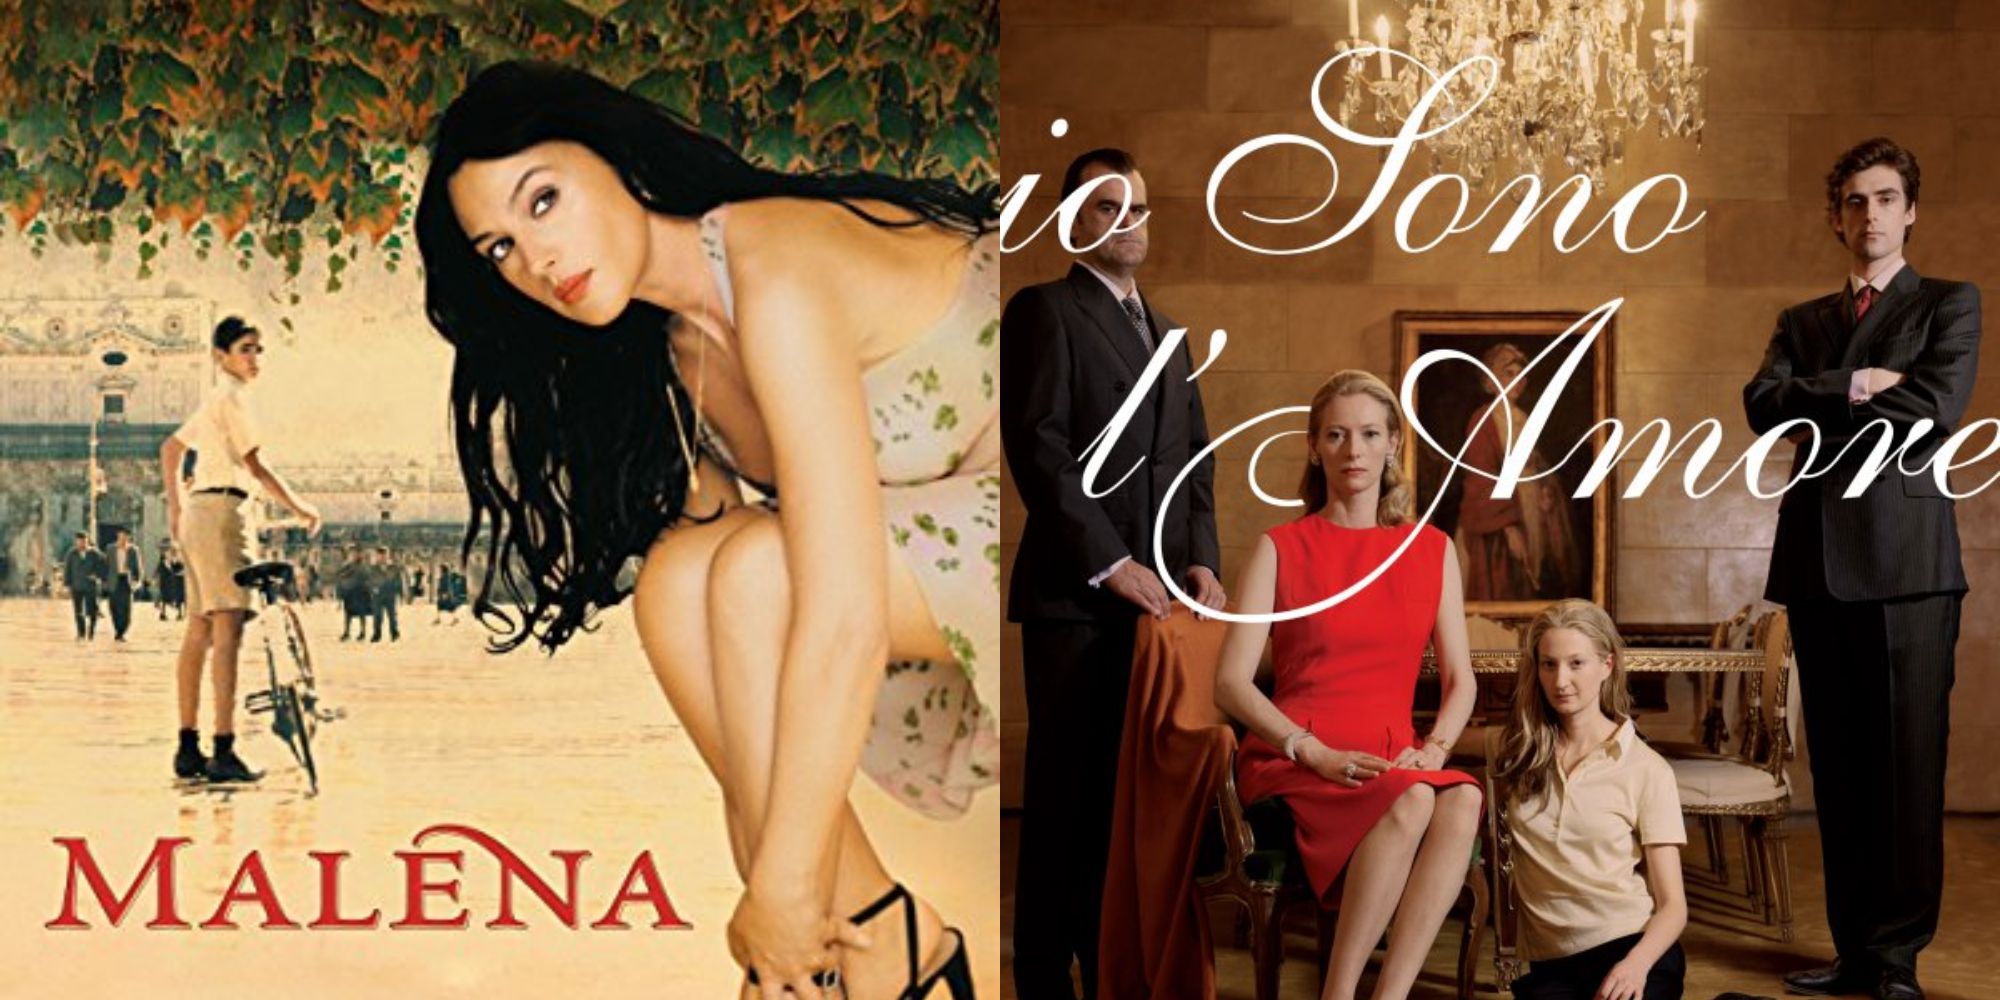 Split image showing posters for Malena and Lo Sono L'amore.